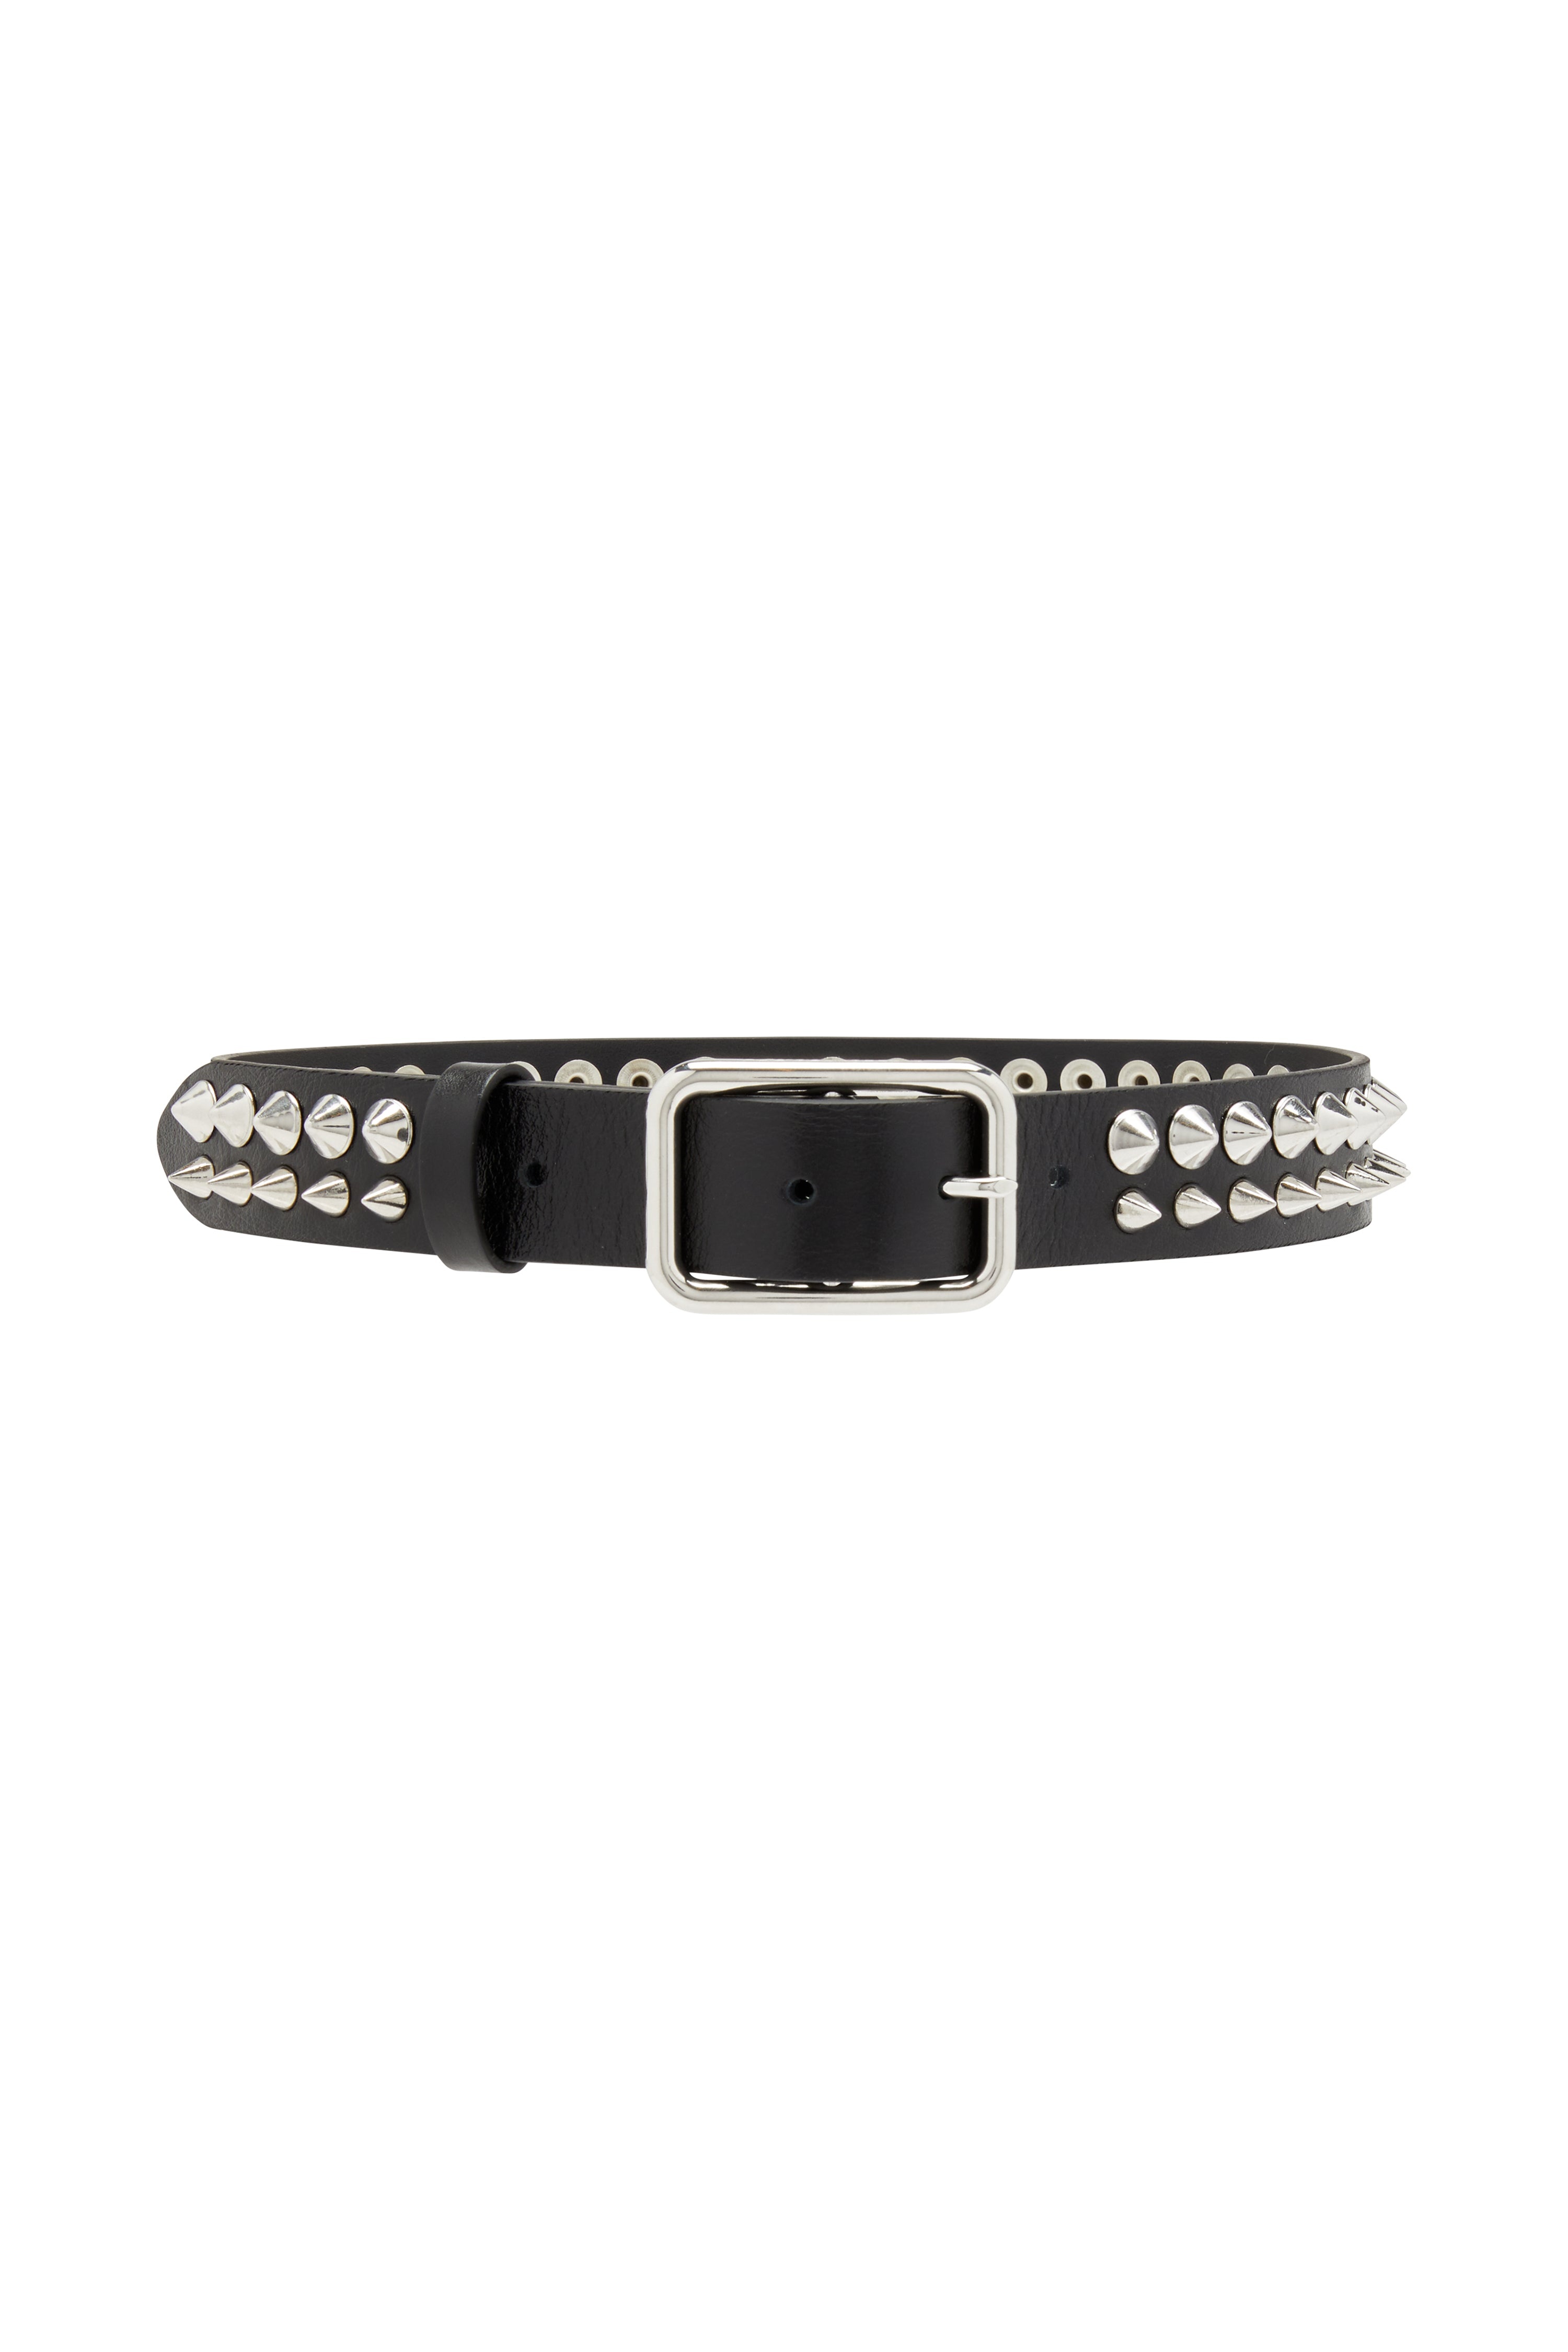 LEATHER BELT WITH SPIKES - 3CM - 1